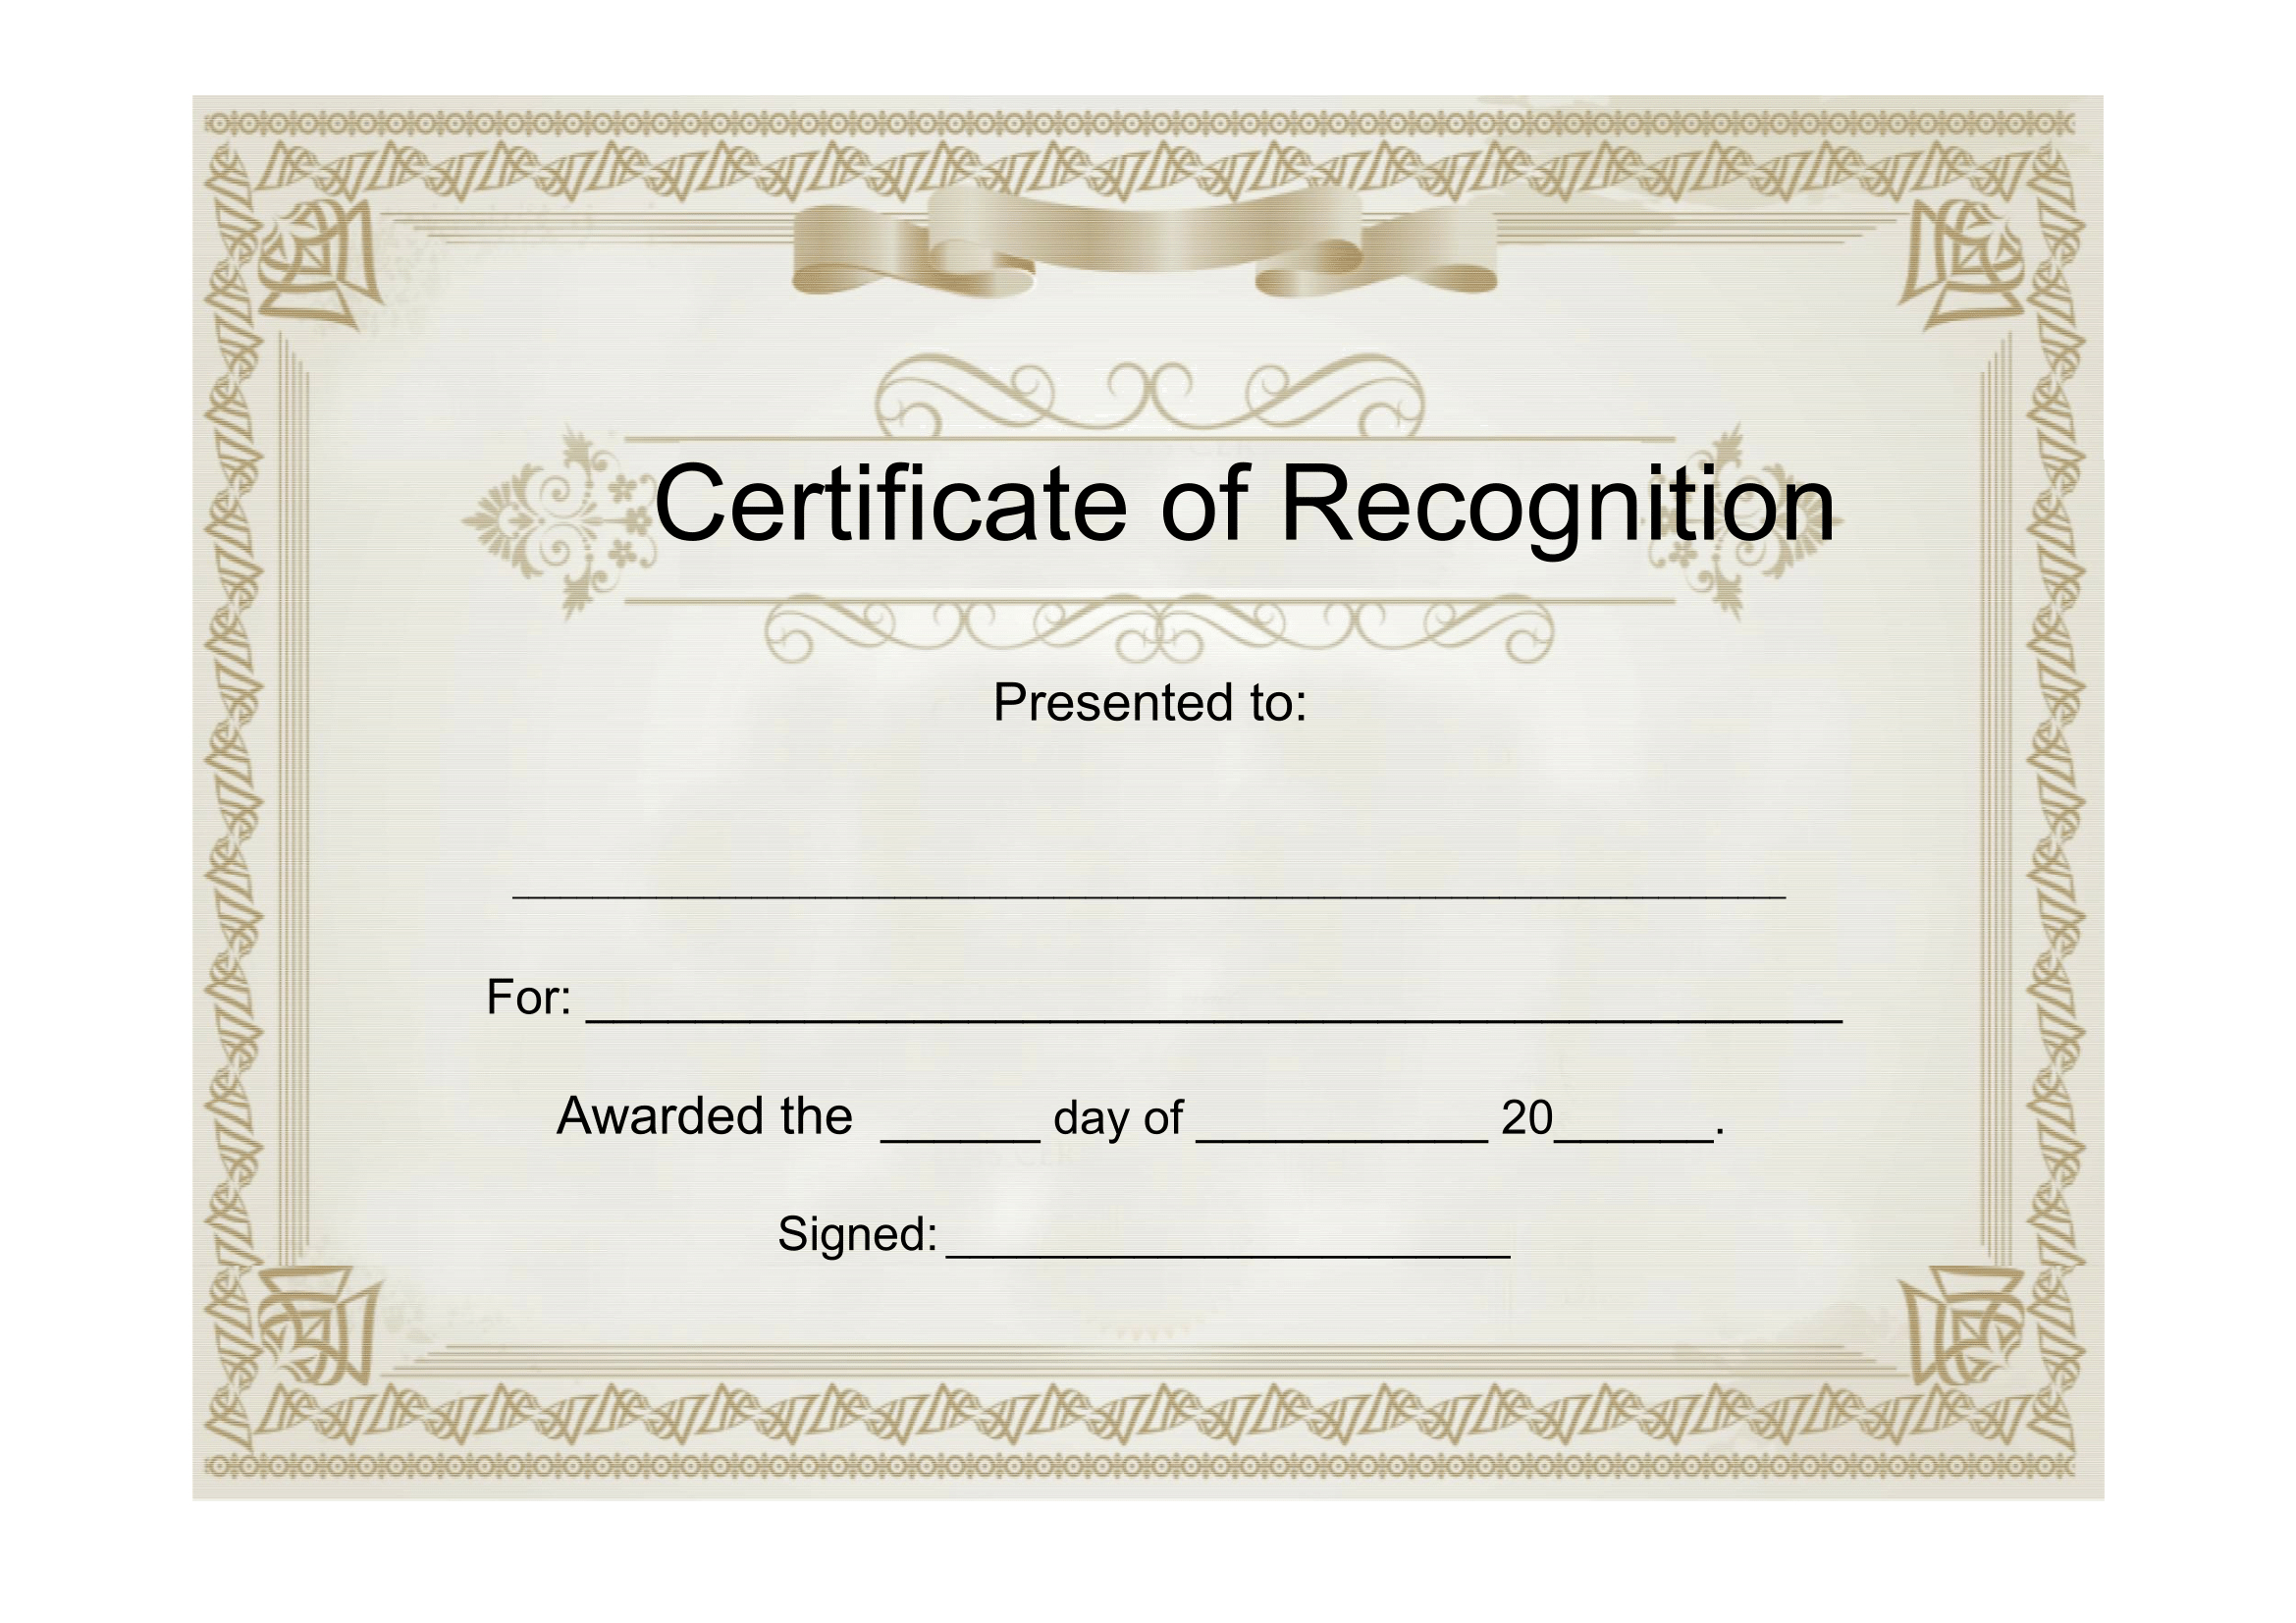 Sample Certificate Of Recognition – Free Download Template Regarding Certificate Templates For Word Free Downloads